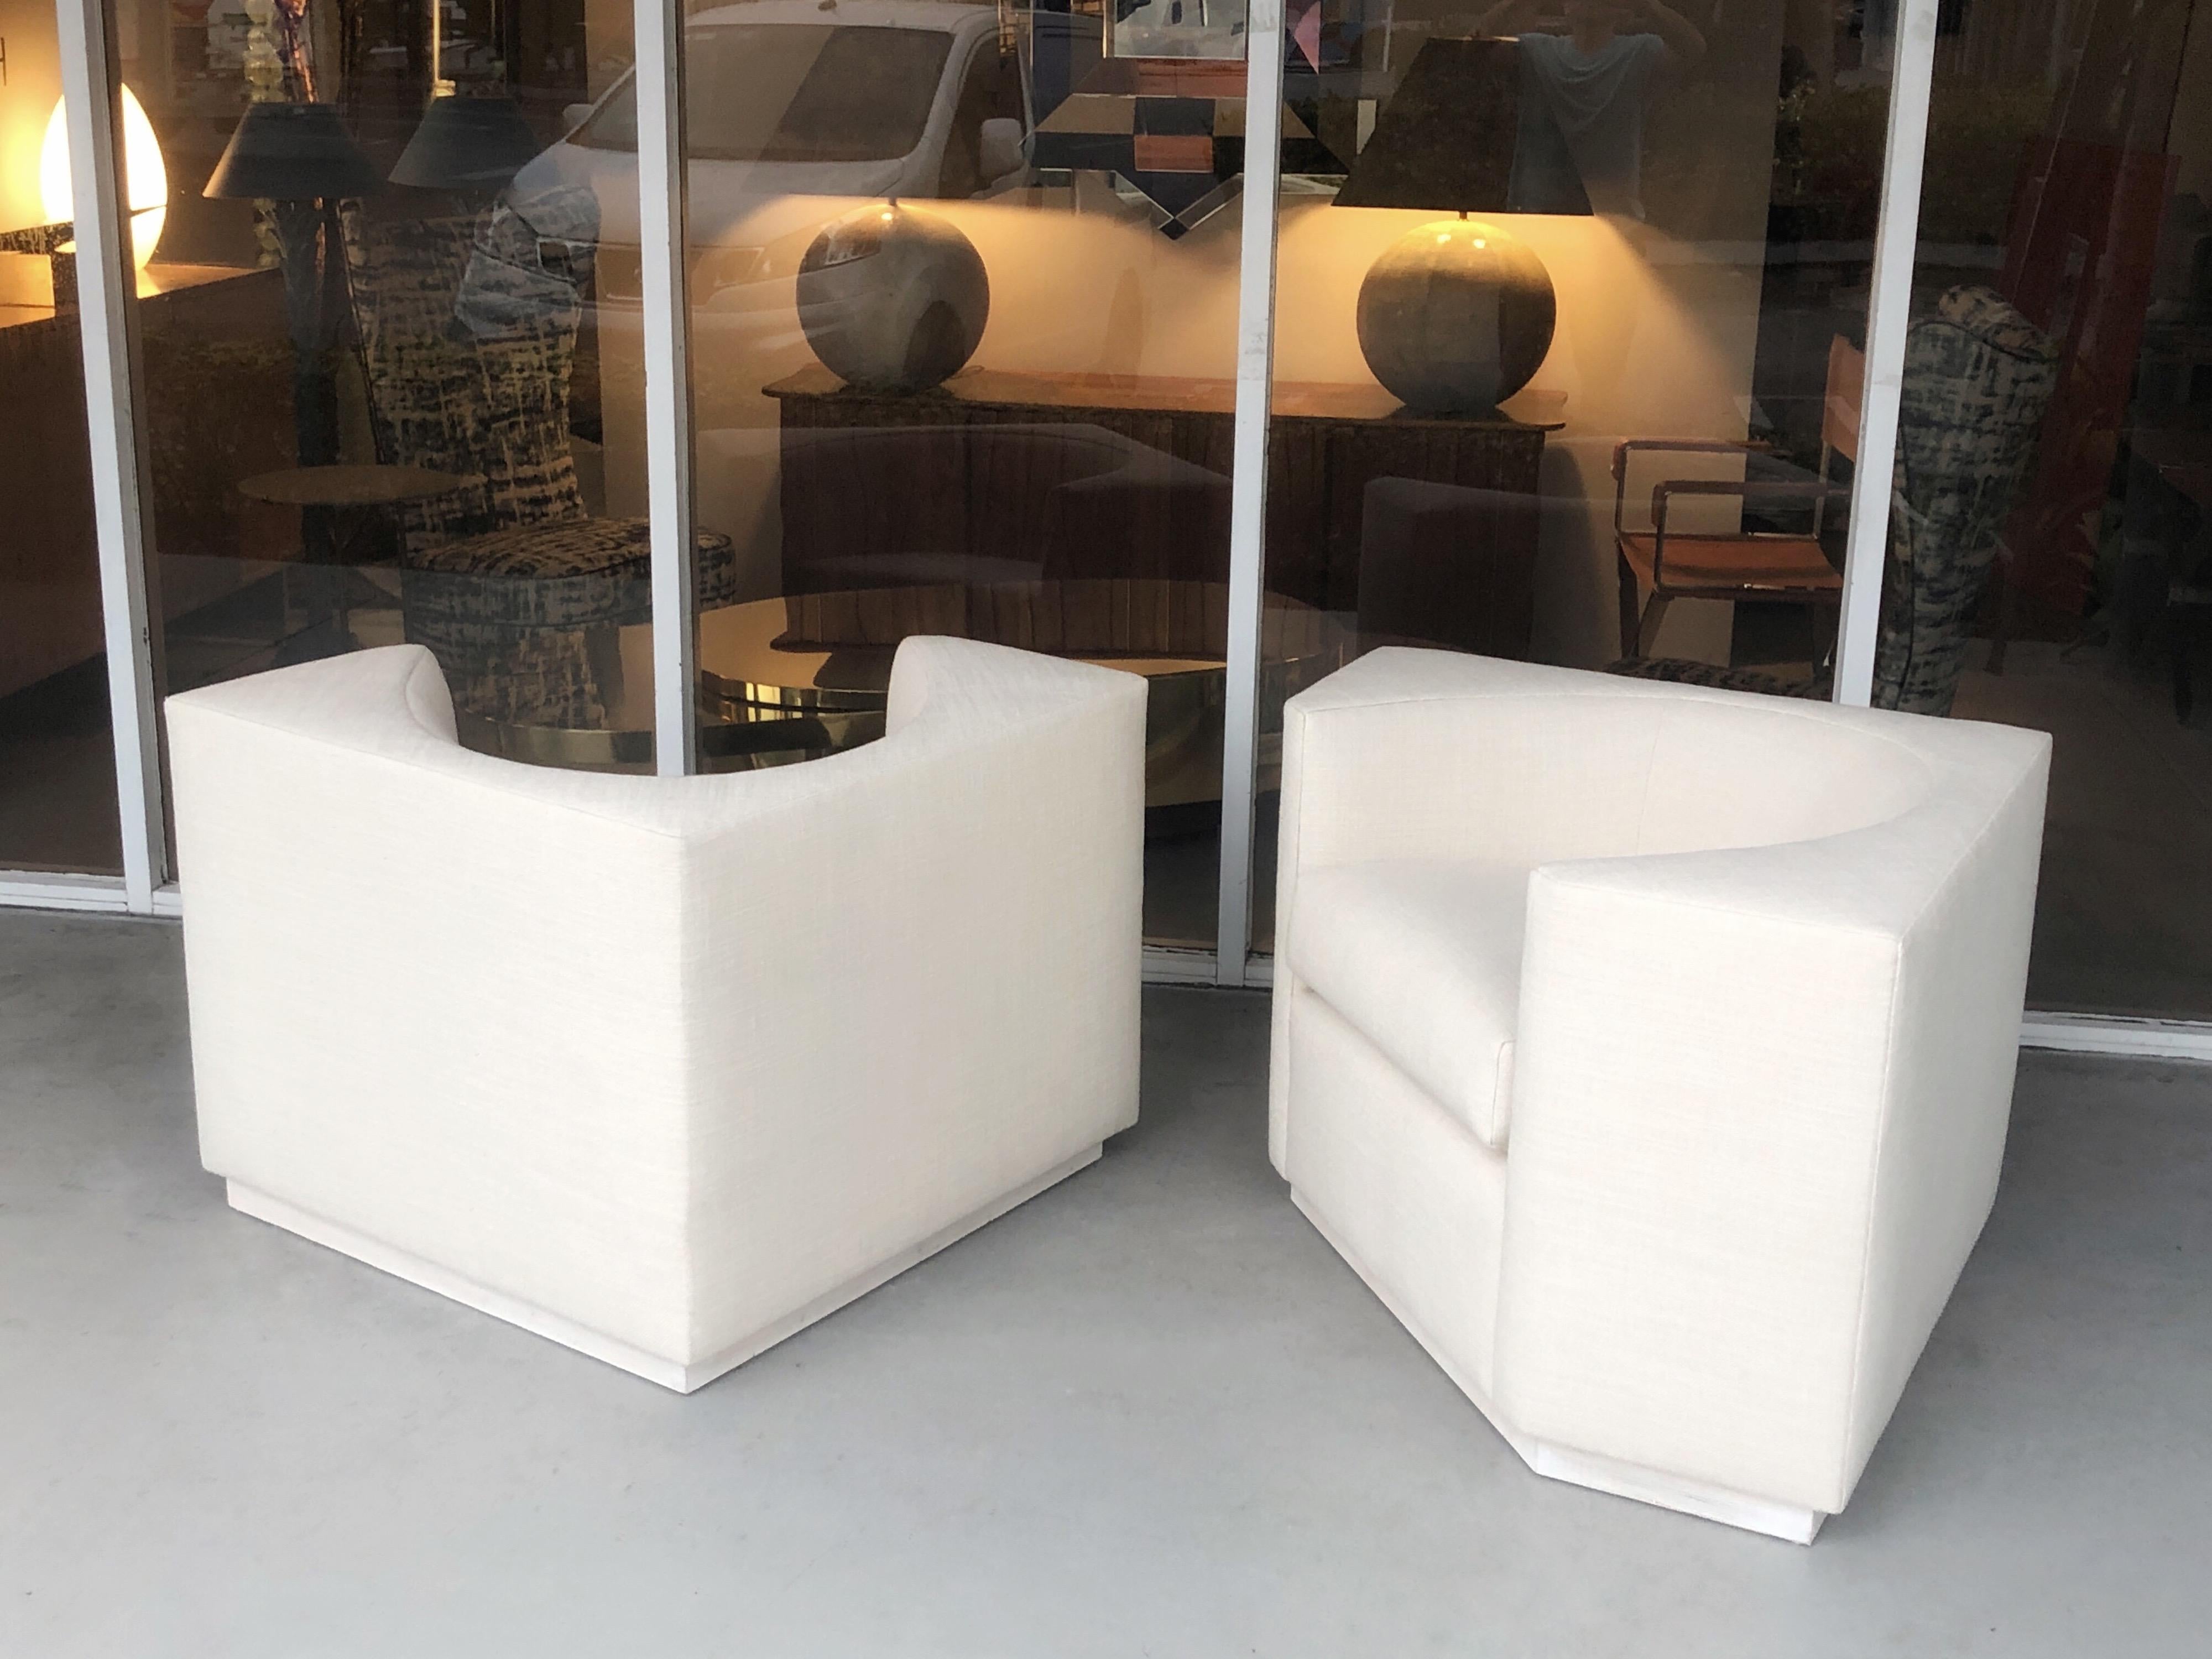 A modern pair of lounge chairs. Geometric design with and angular exterior and a rounded seating area. Very clean design.